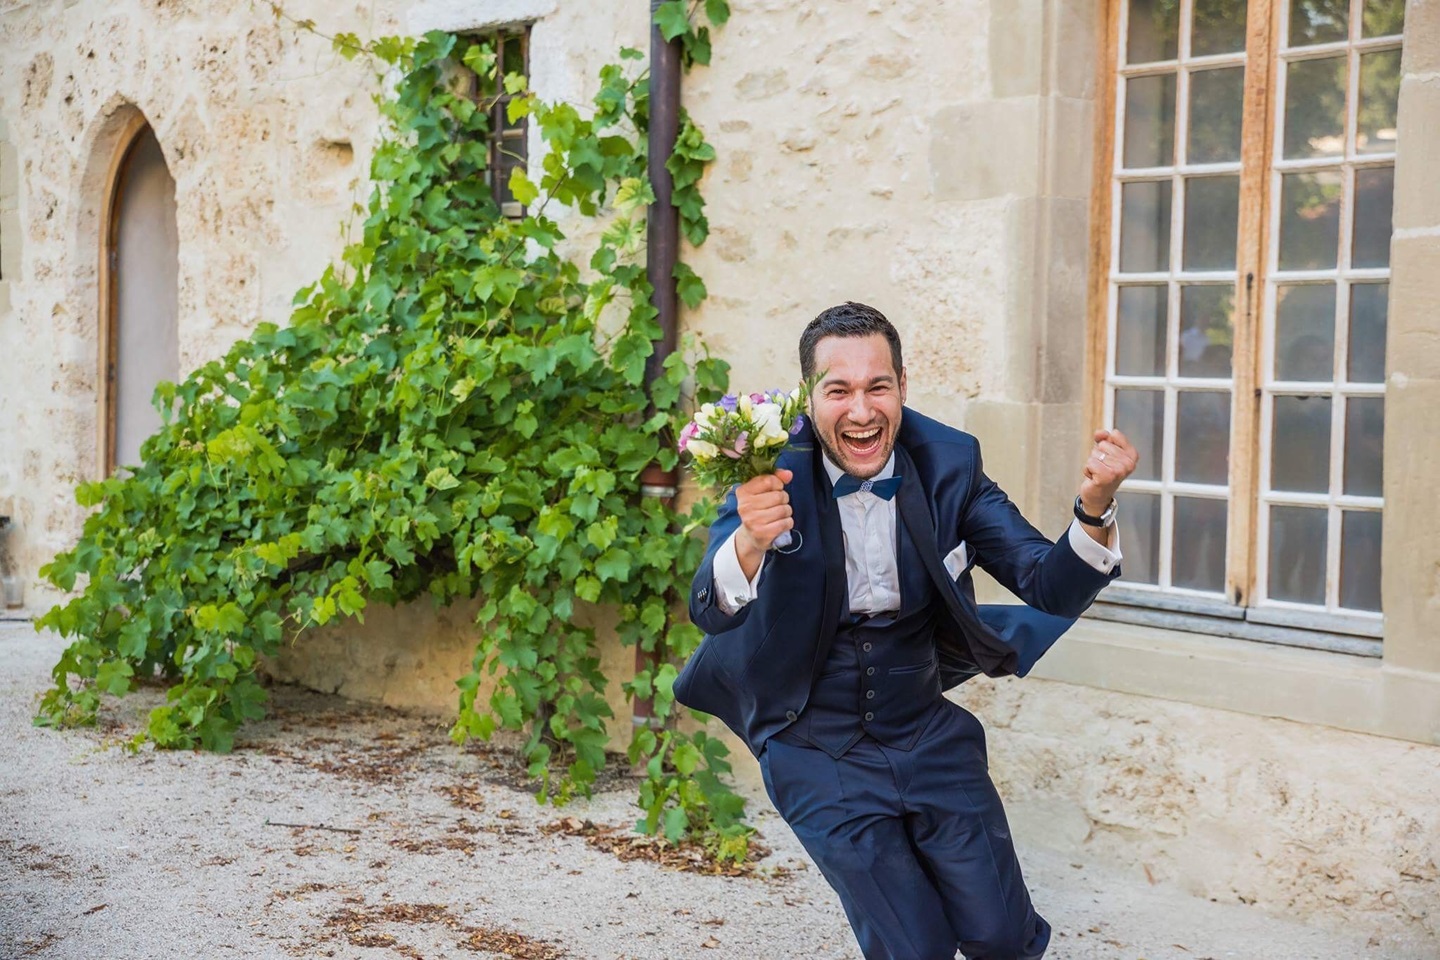 Mr Sterpione is running happily and smiling with a bouquet of flowers in his right hand